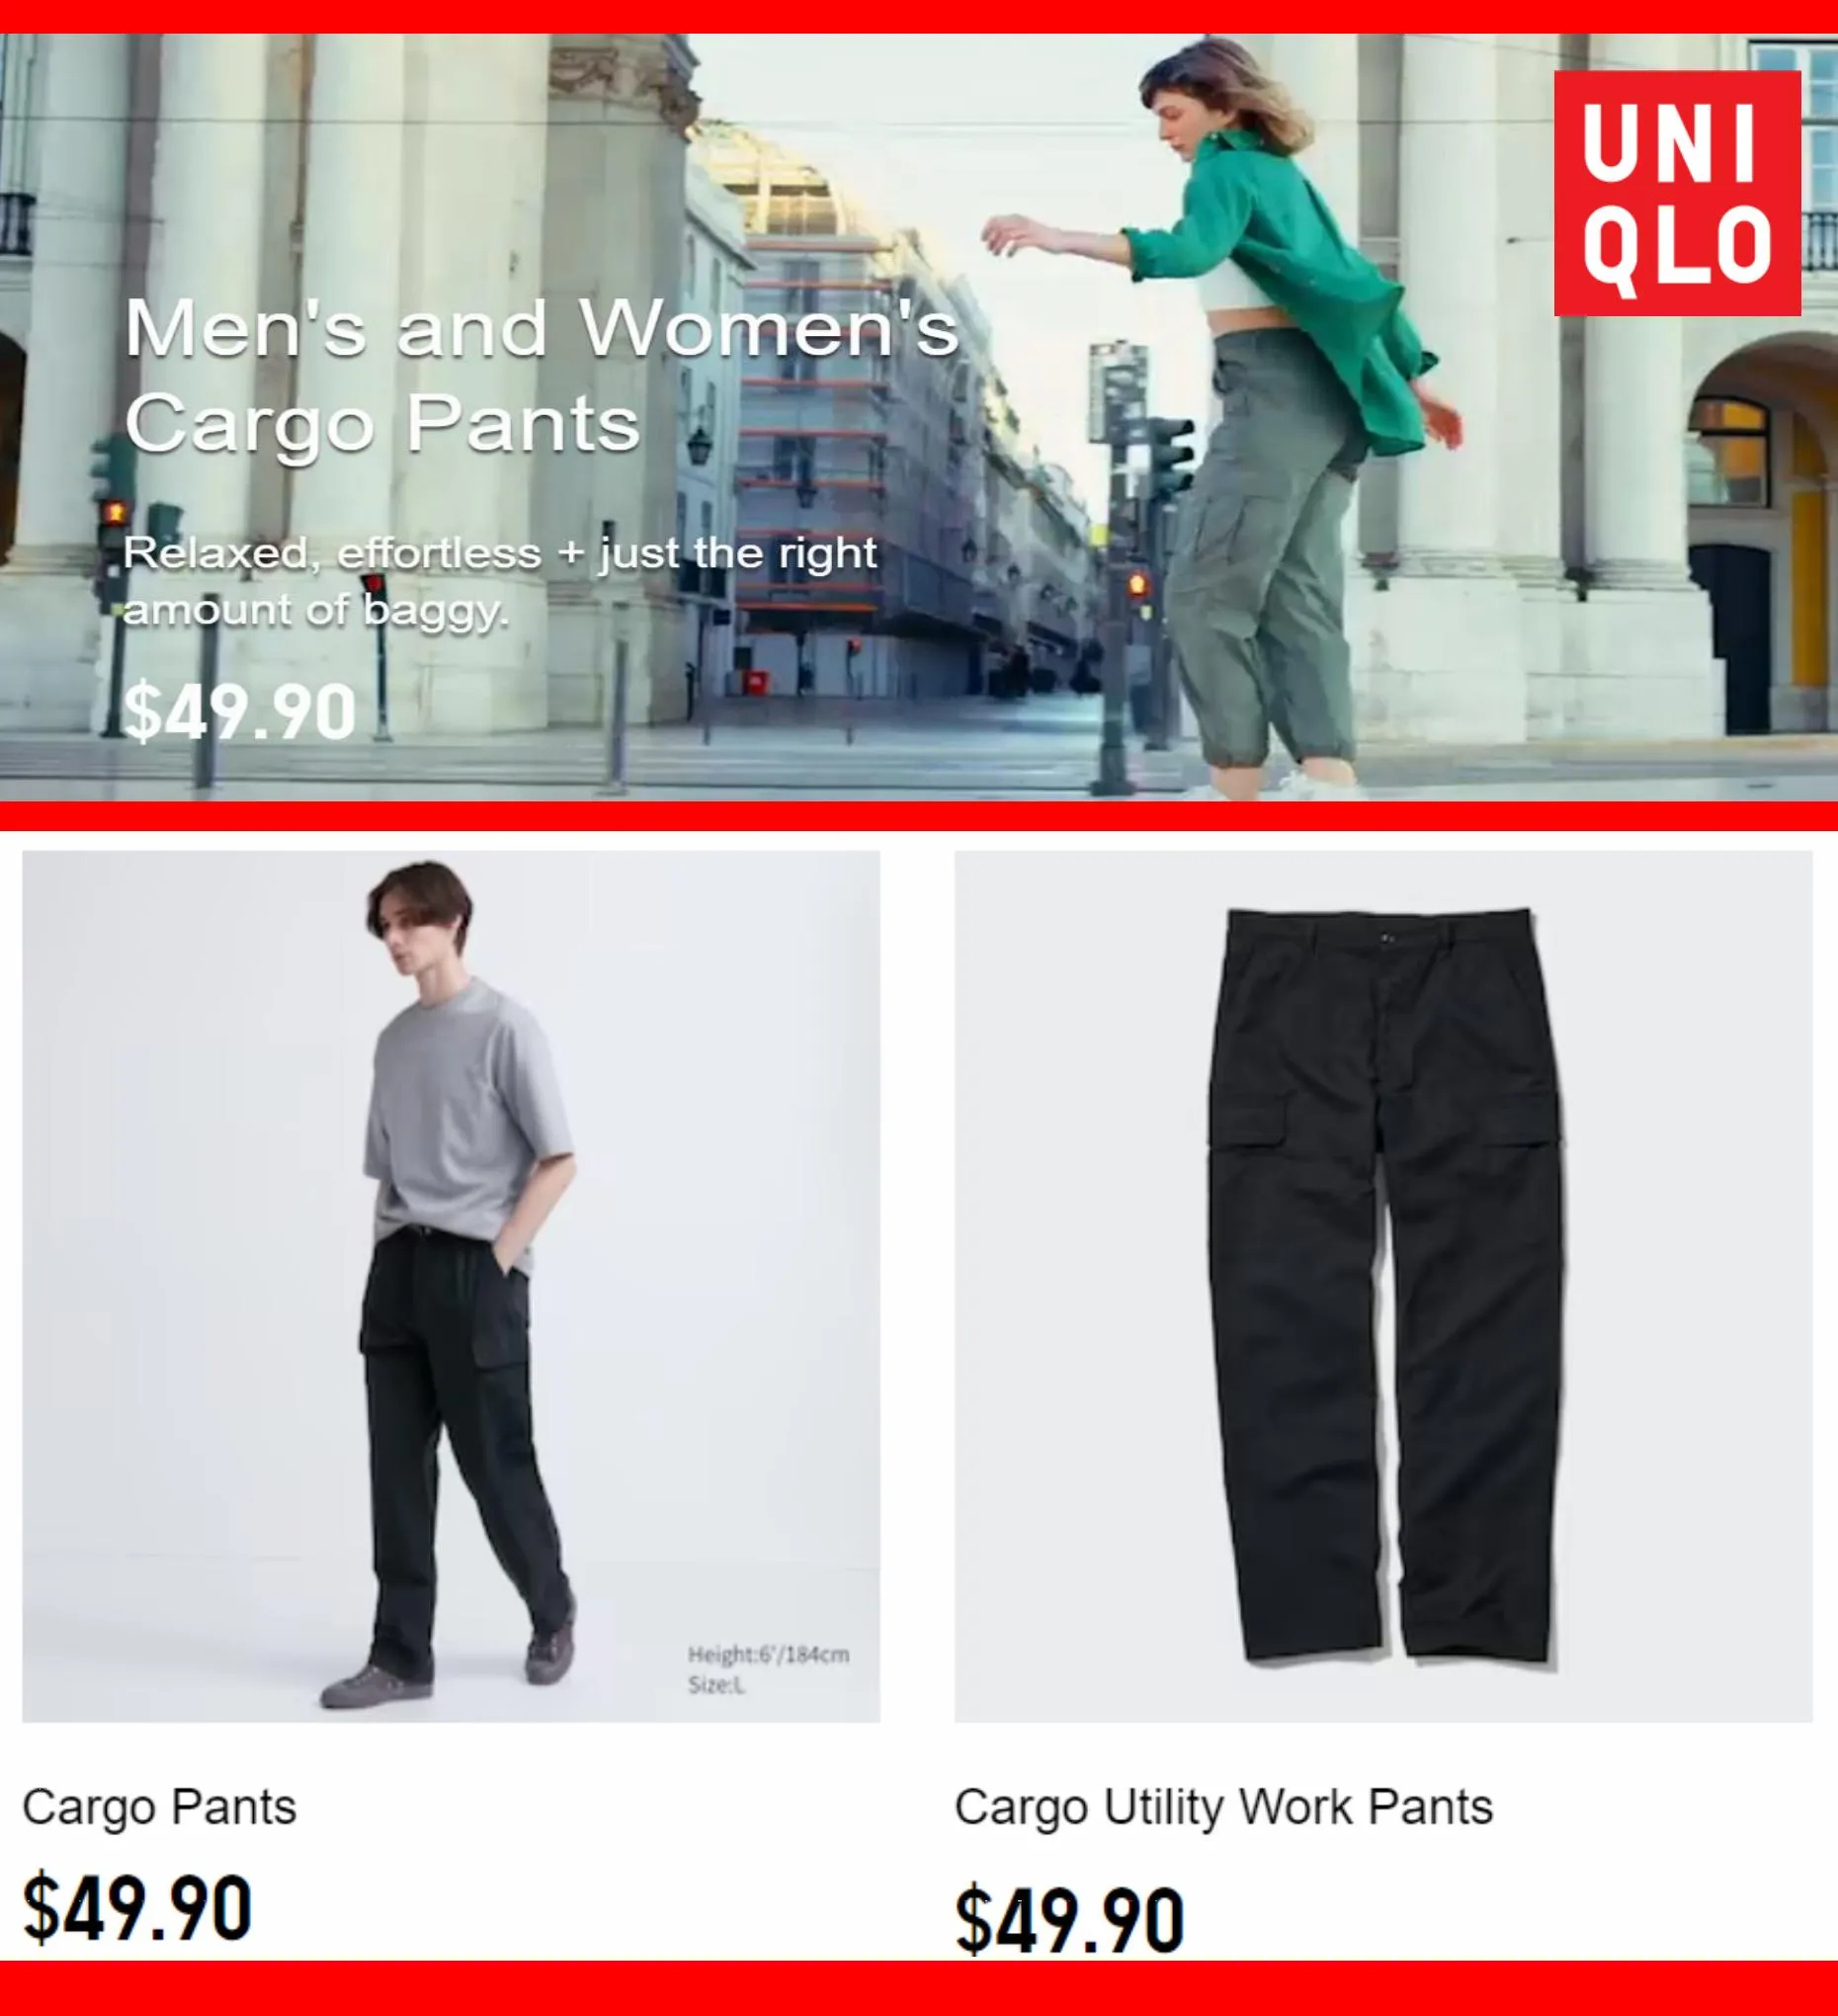 Catalogue Men's and Women's Cargo Pants $49.90, page 00007